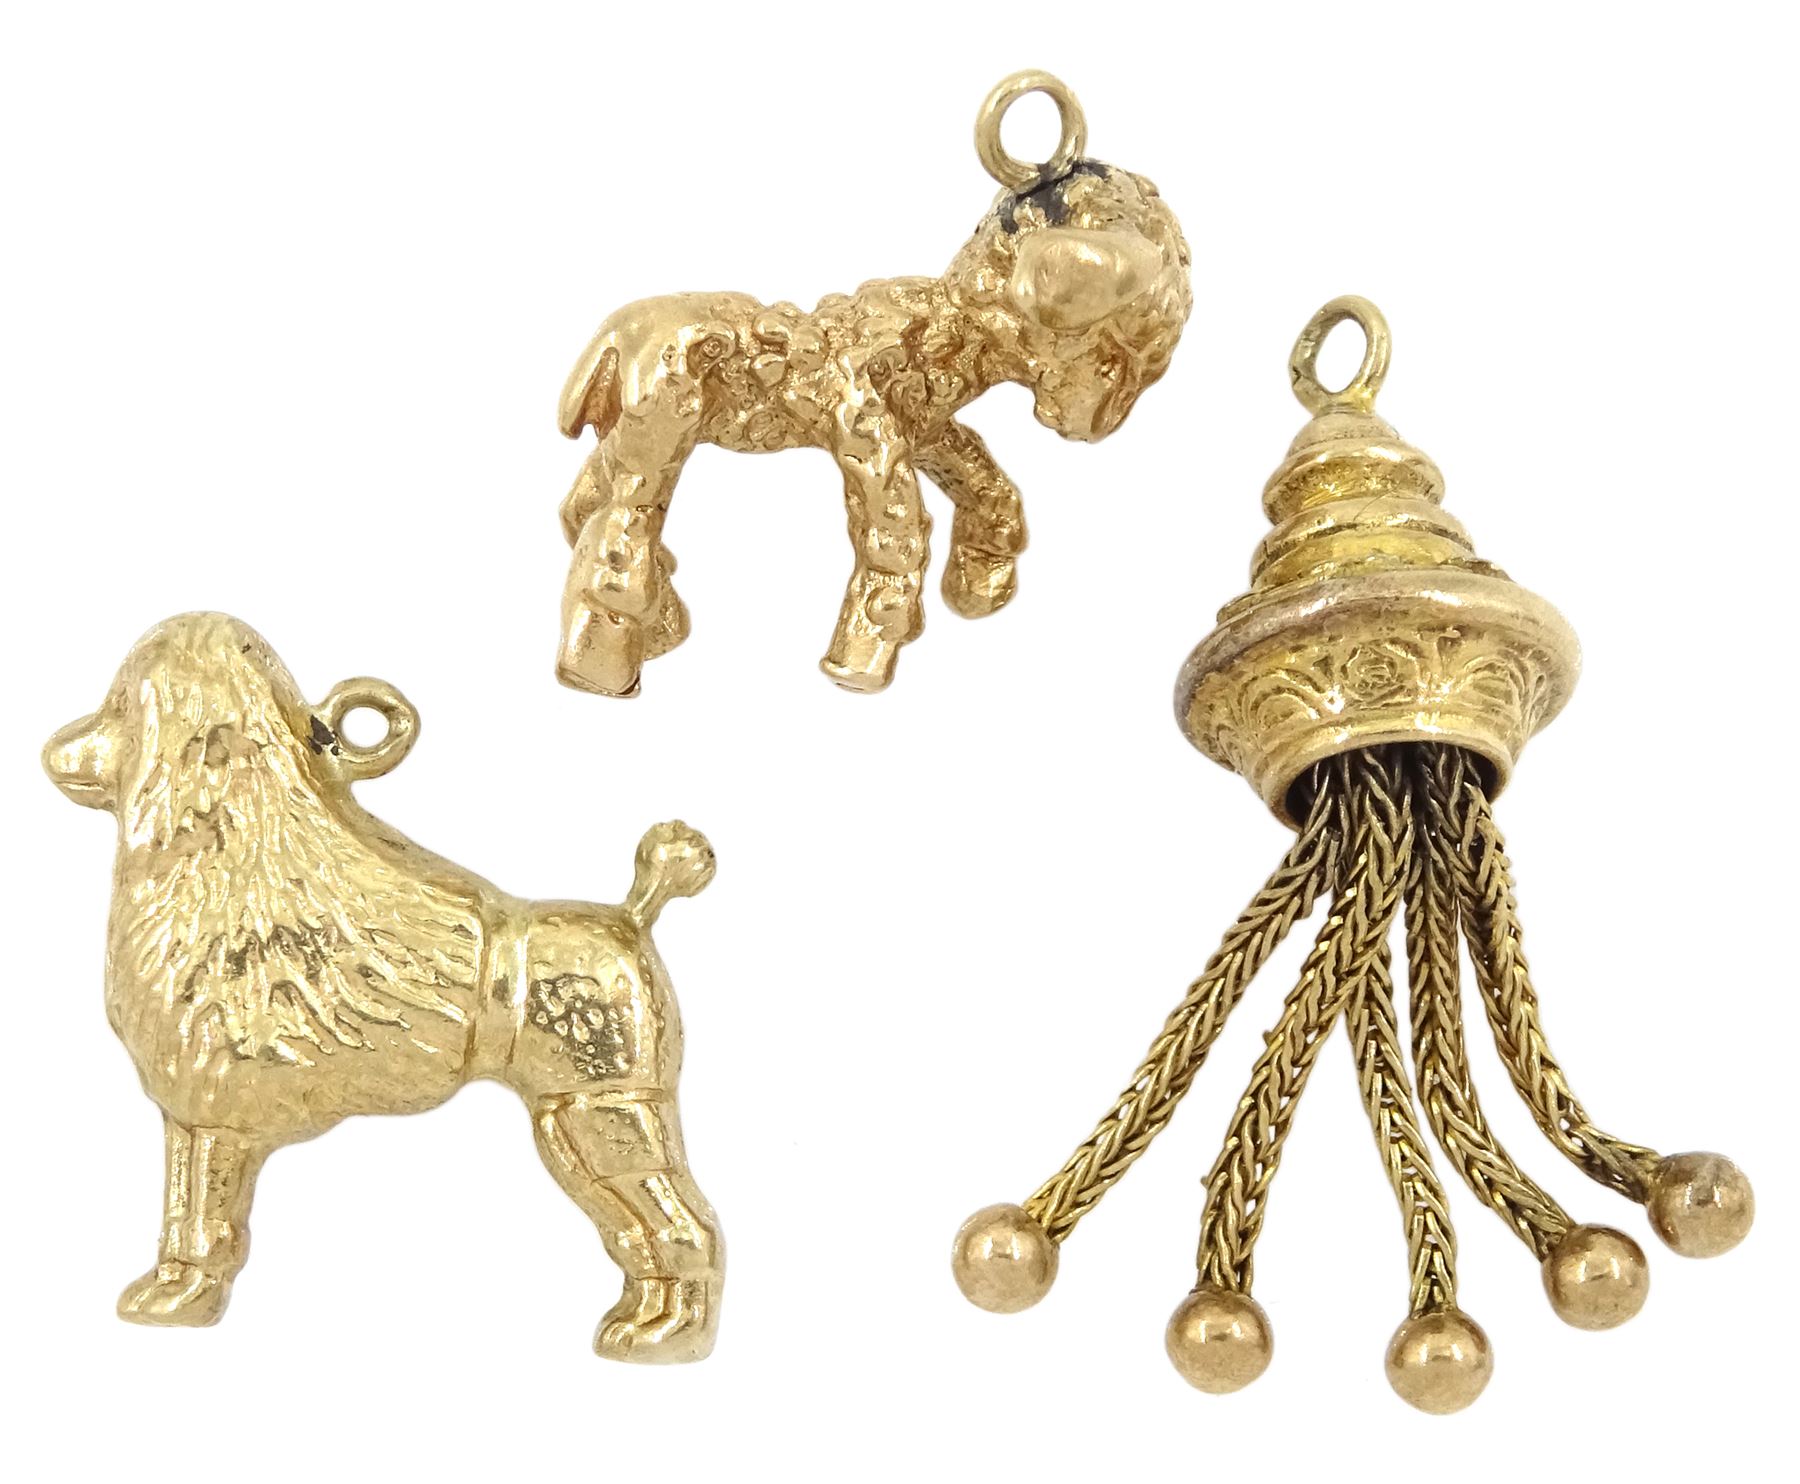 Three 9ct gold pendant/charms including poodle